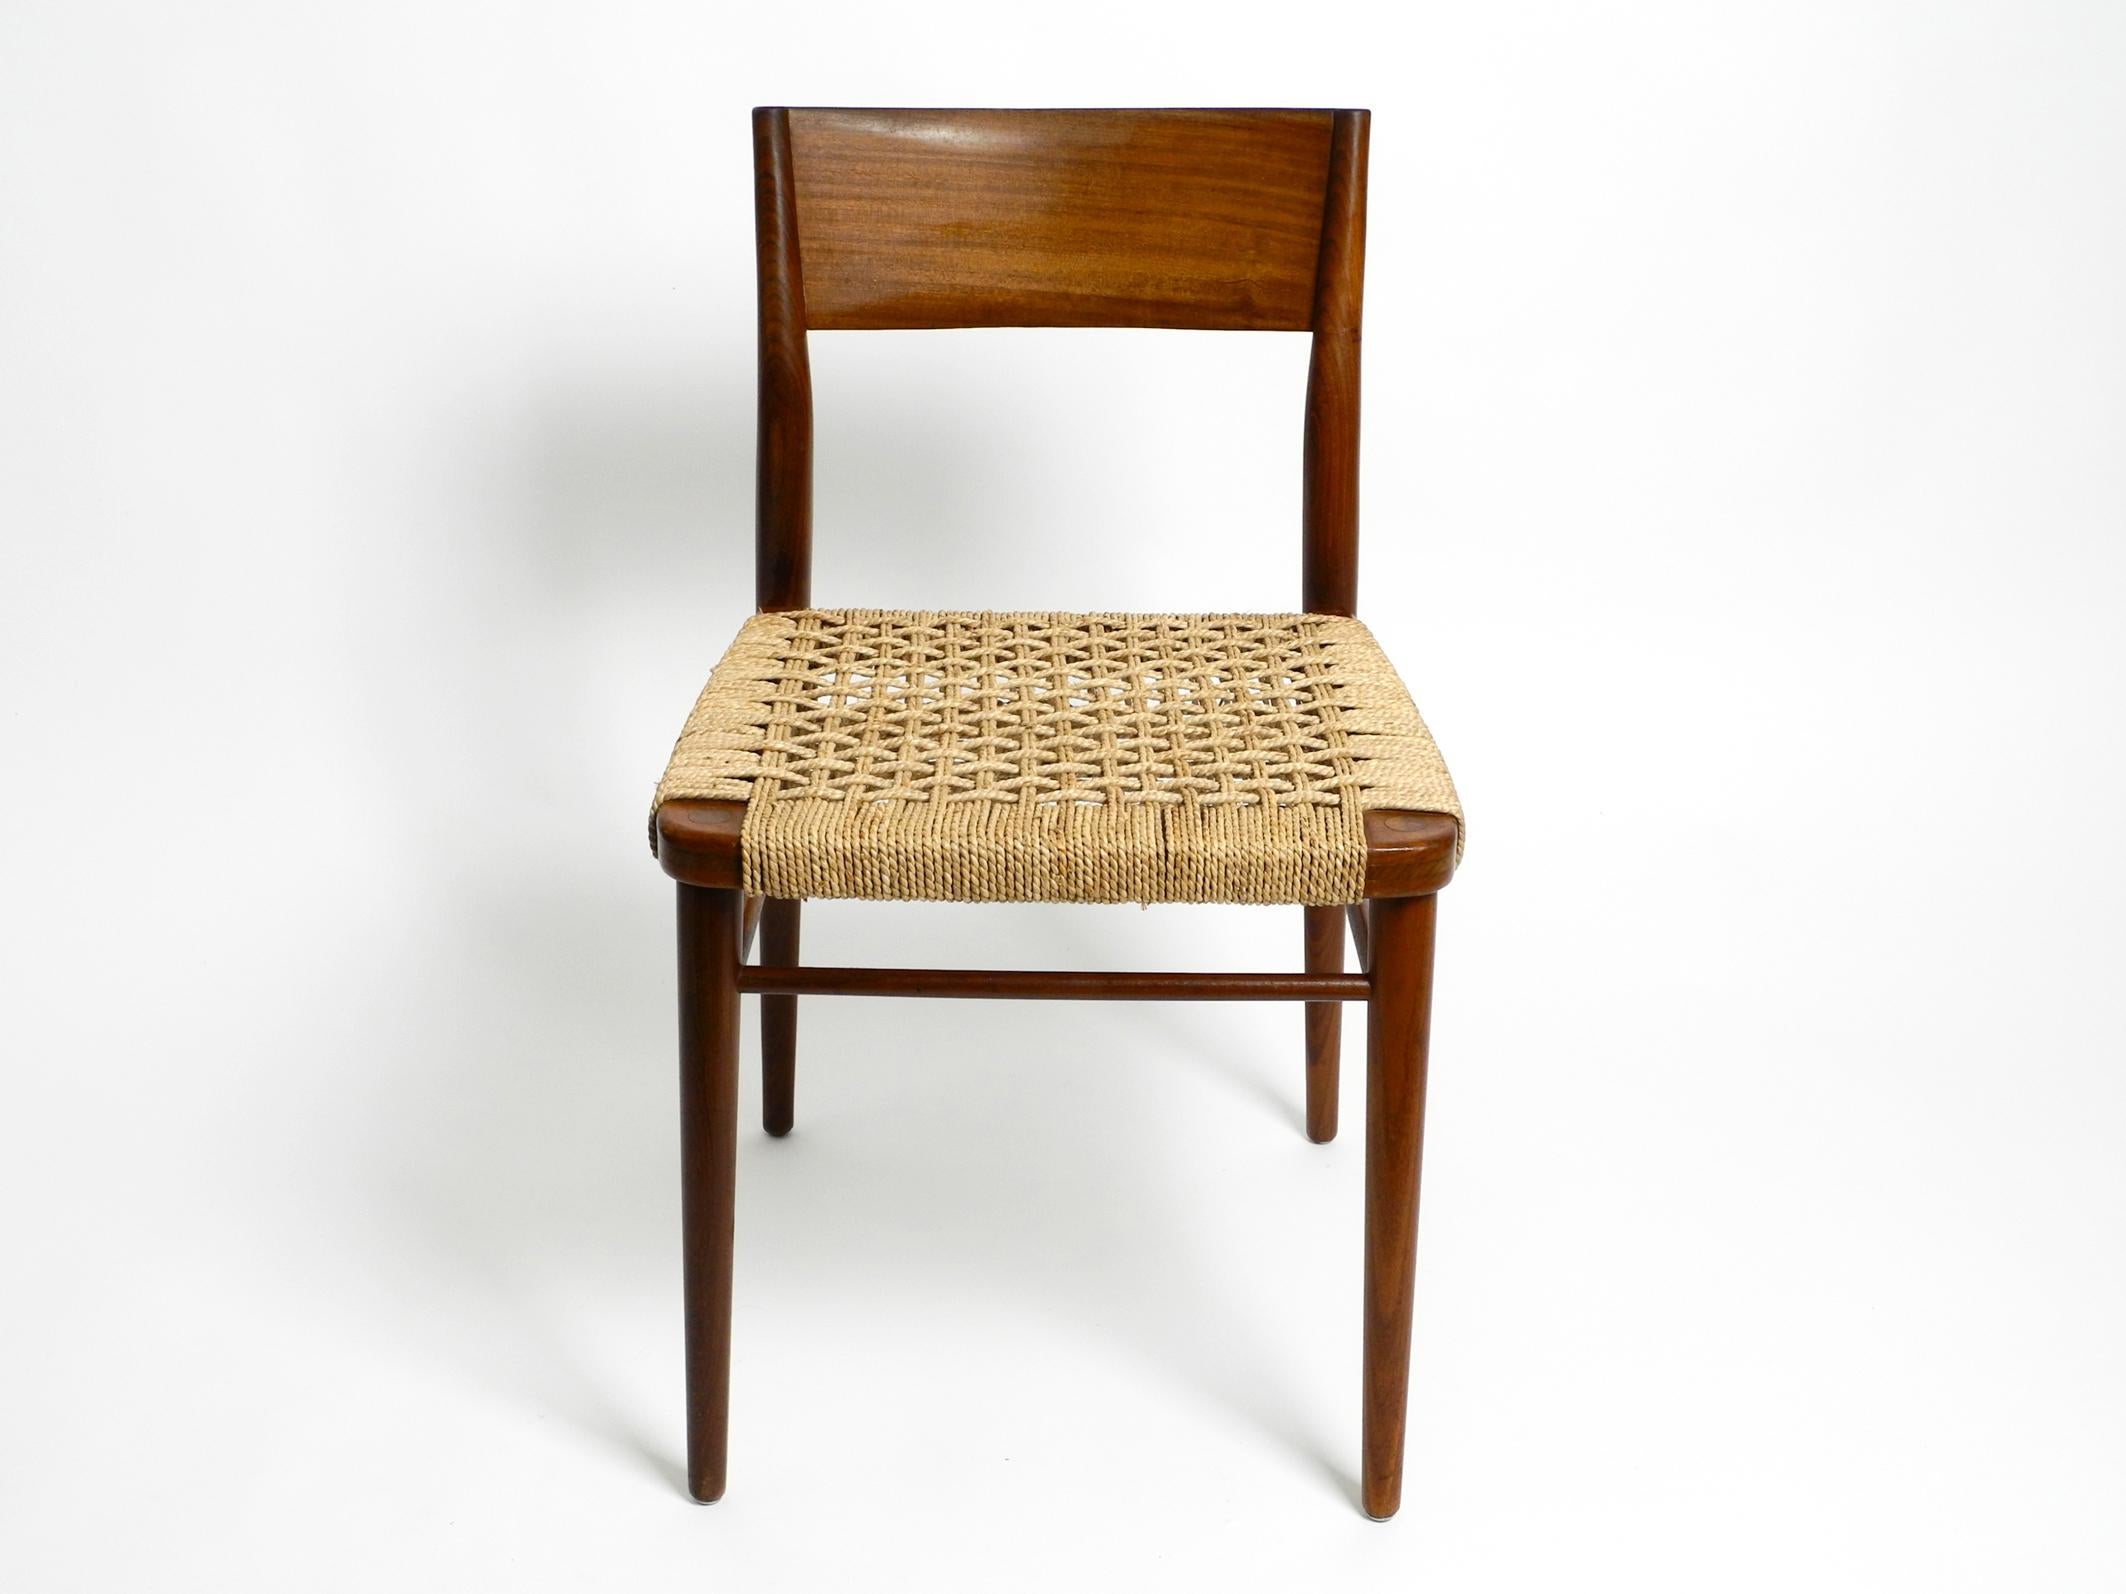 Two Original 1960s Wilkhahn Chairs Made of Walnut with Wicker Cane For Sale 9